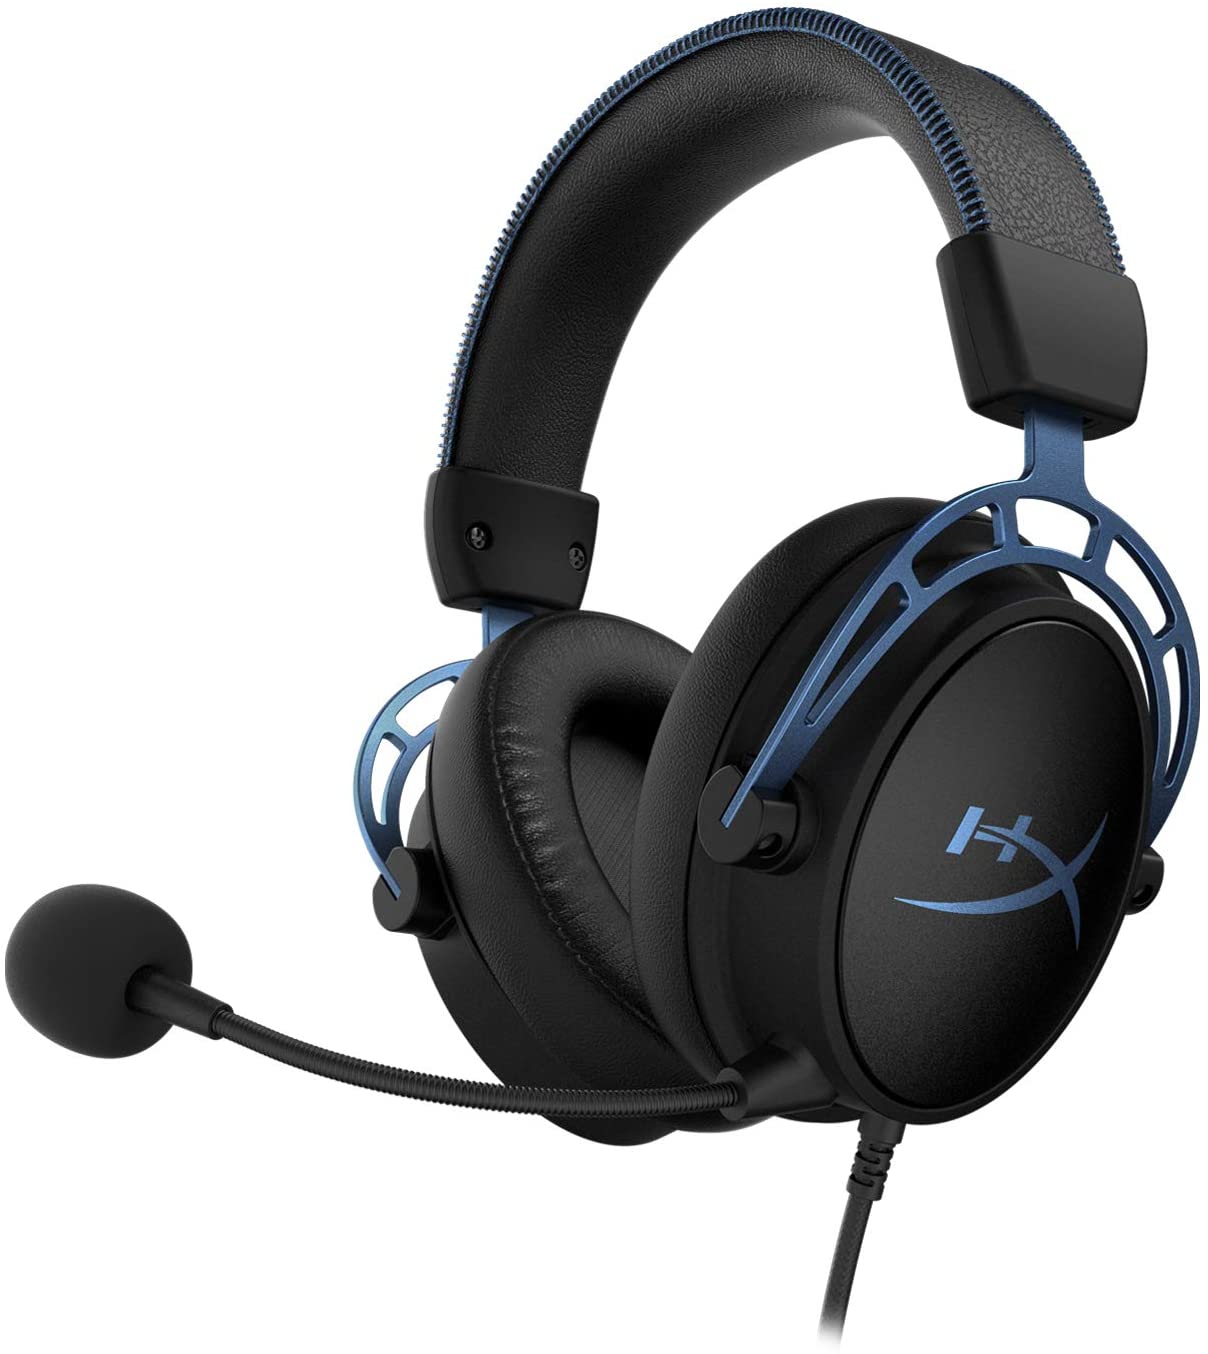 HyperX Cloud Alpha S 7.1 Surround Sound PC Gaming Headset (Black/Blue) $73.12 + Free Shipping